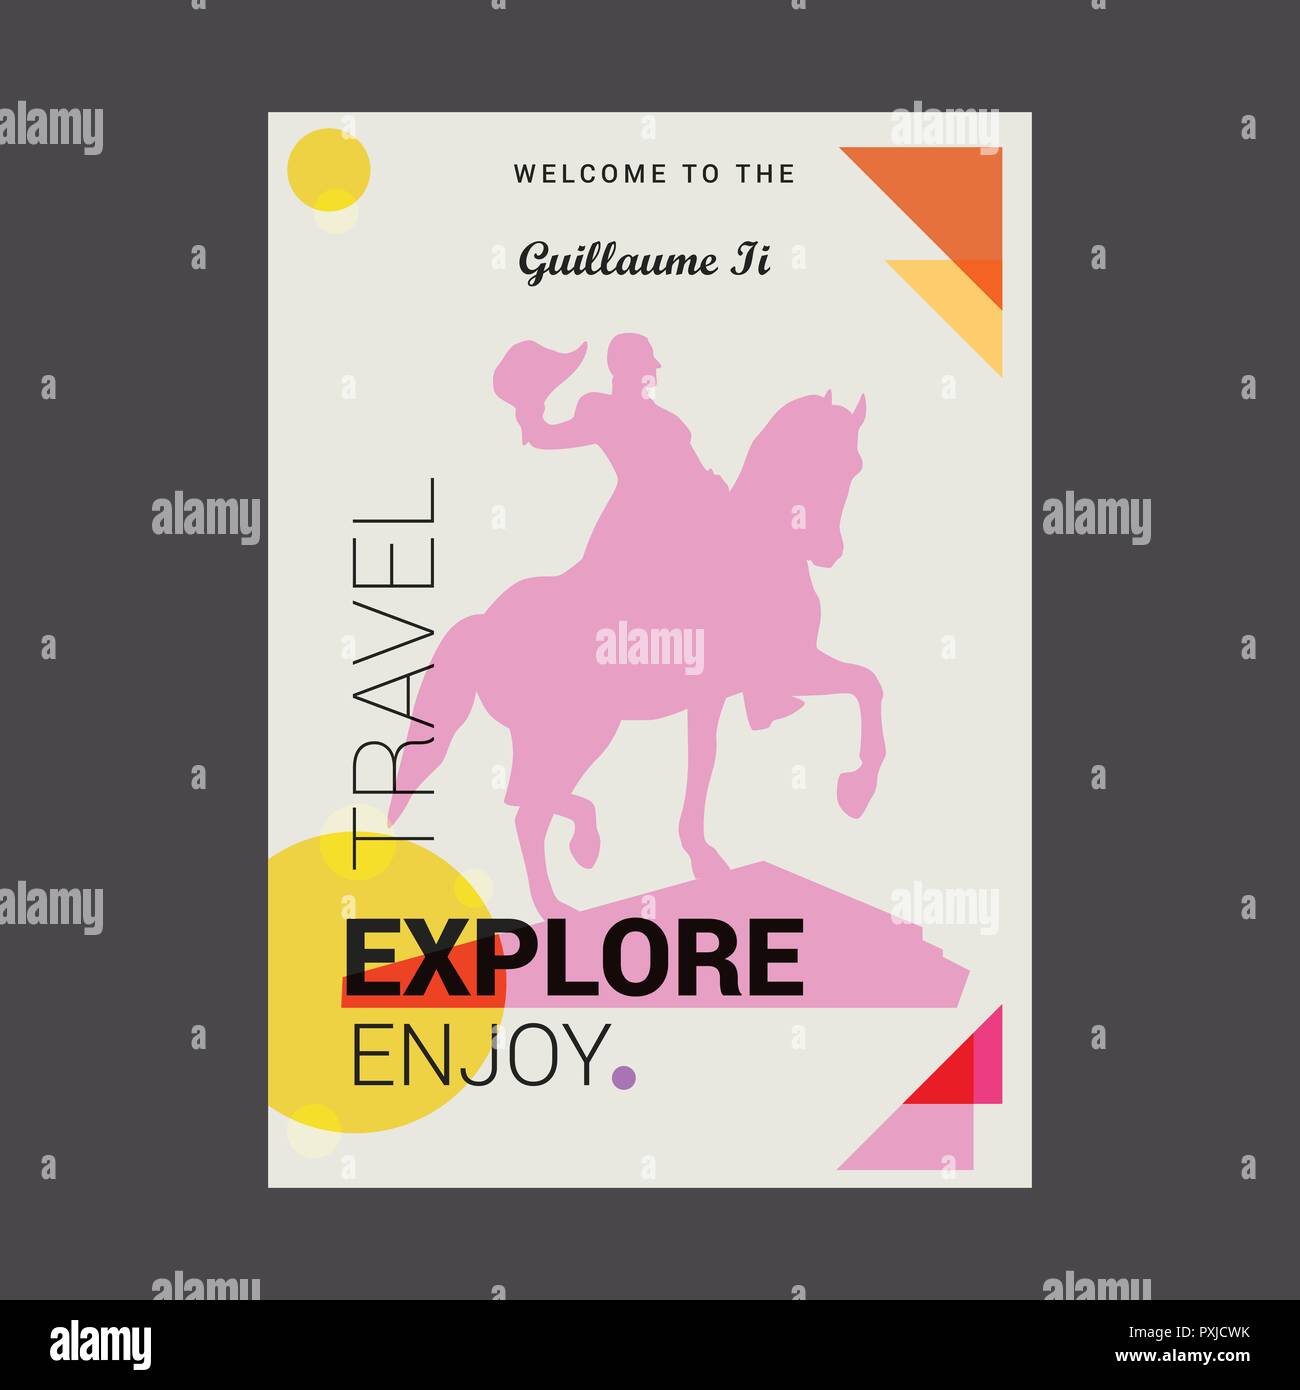 Welcome to The Guillaume li Explore, Travel Enjoy Poster Template Stock Vector